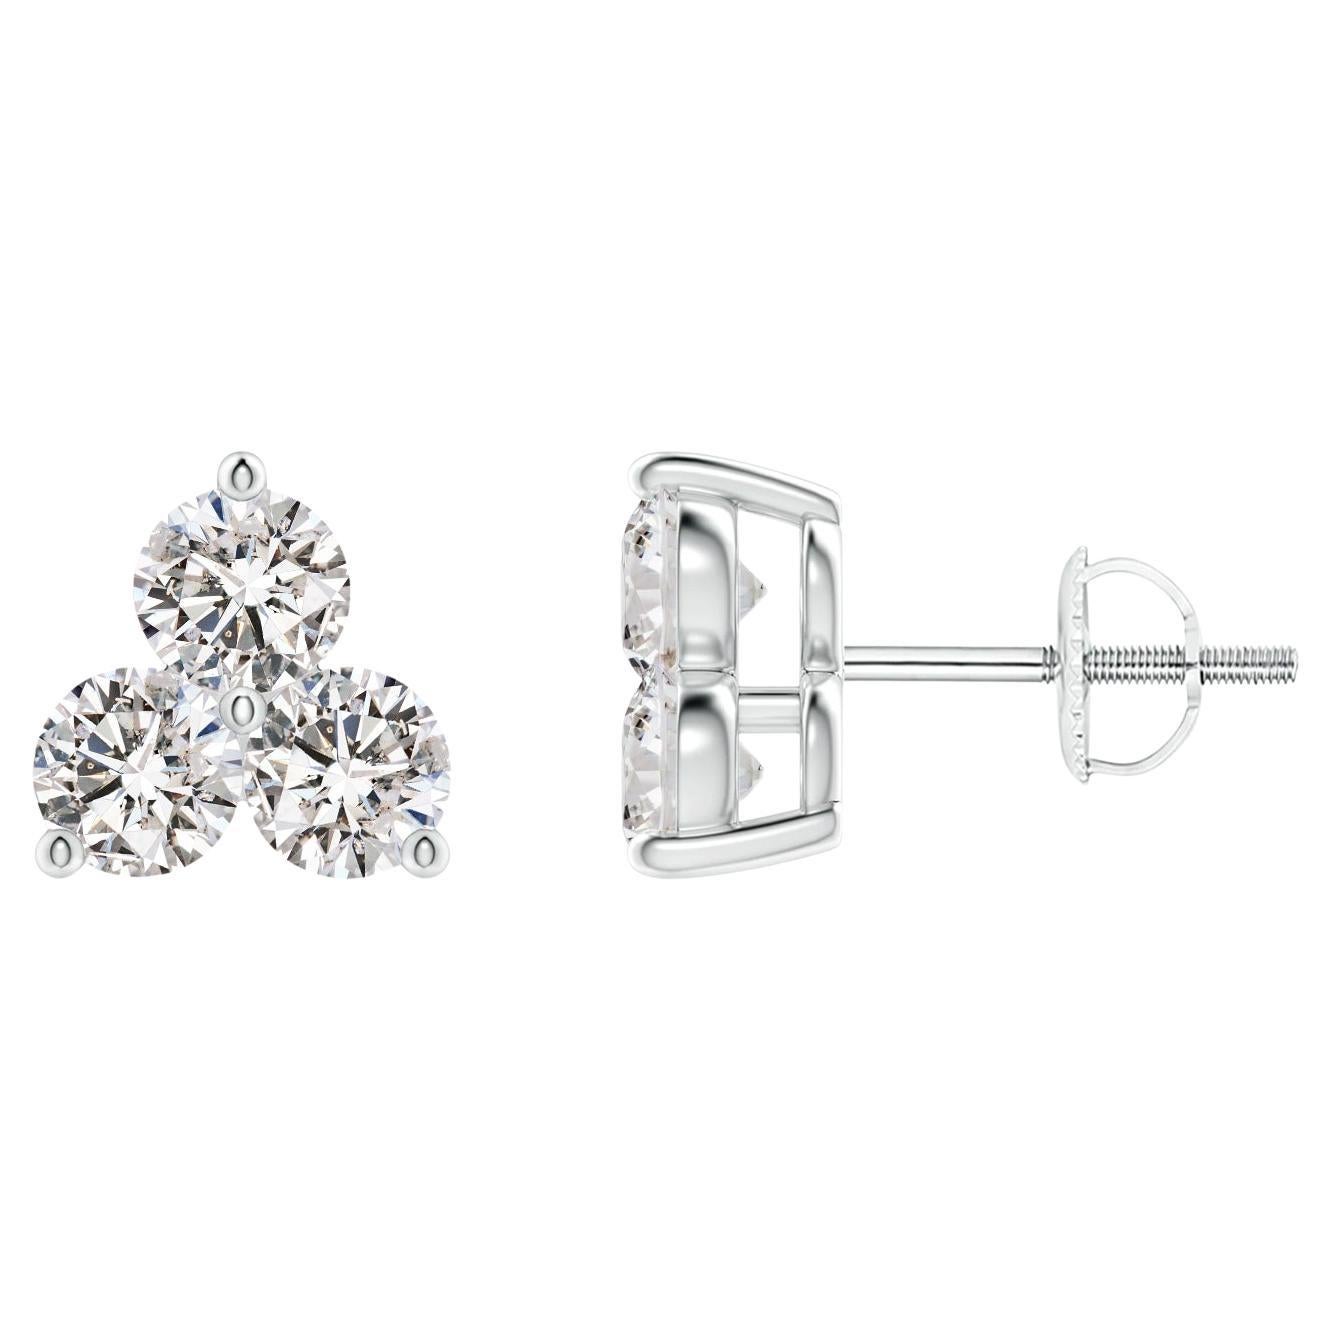 Natural Diamond Stud Earrings in Platinum (0.75cttw  Color-I-J  Clarity-I1-I2)